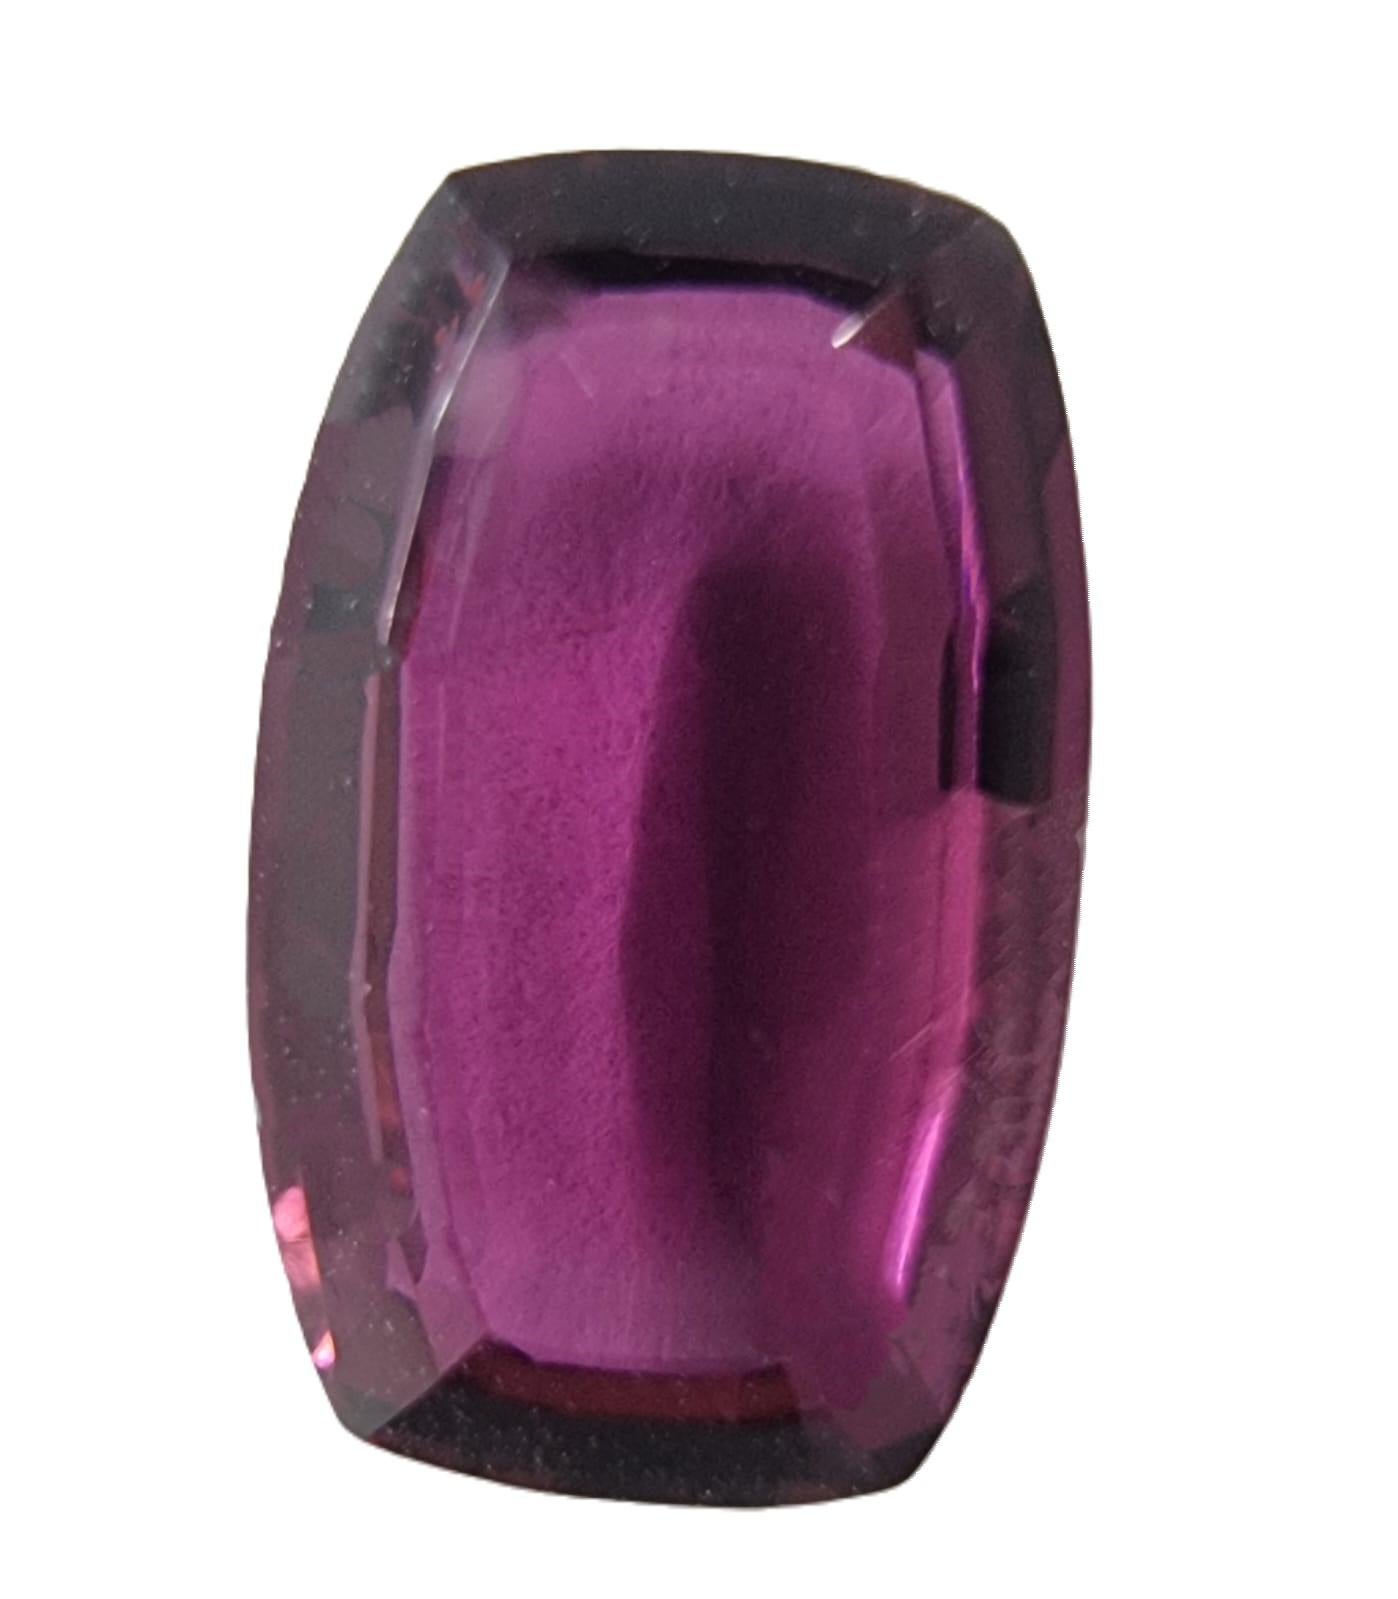 Unveil the captivating charm of our 2.6-carat Oval Pinkish Red Rubellite Tourmaline Loose Gemstone. 

Gemstone Details:
Carat Weight: 2.6 carats
Shape: Oval Cut
Variety: Pinkish Red Rubellite Tourmaline

Measurements:
Length: Approximately